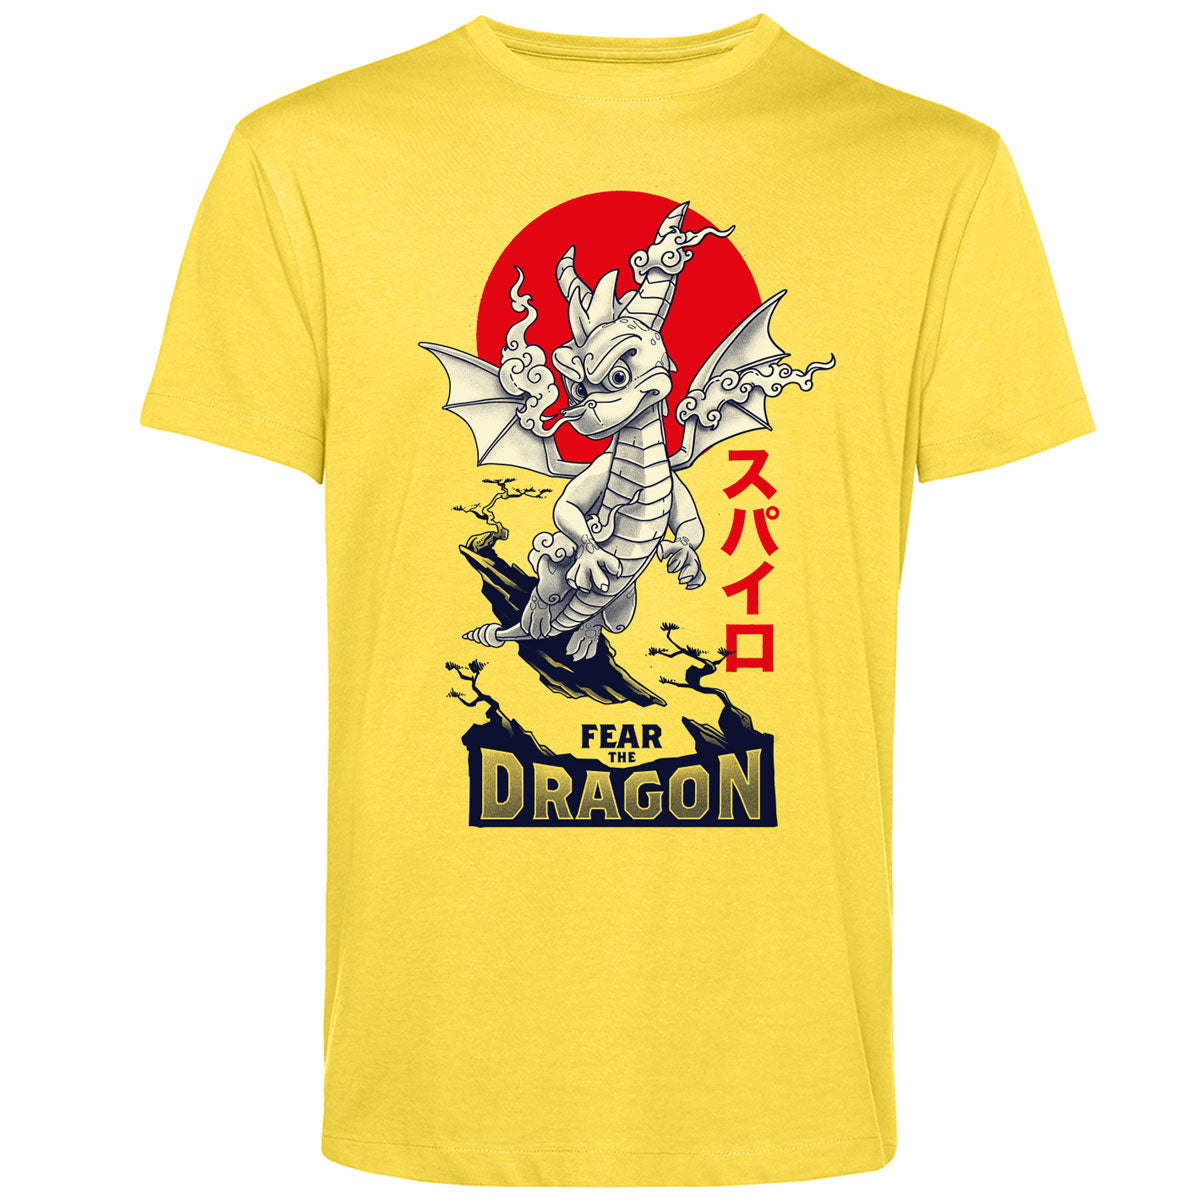 Spyro Fear The Dragon T-shirt with Japanese Rising Sun on Yellow Crew Neck